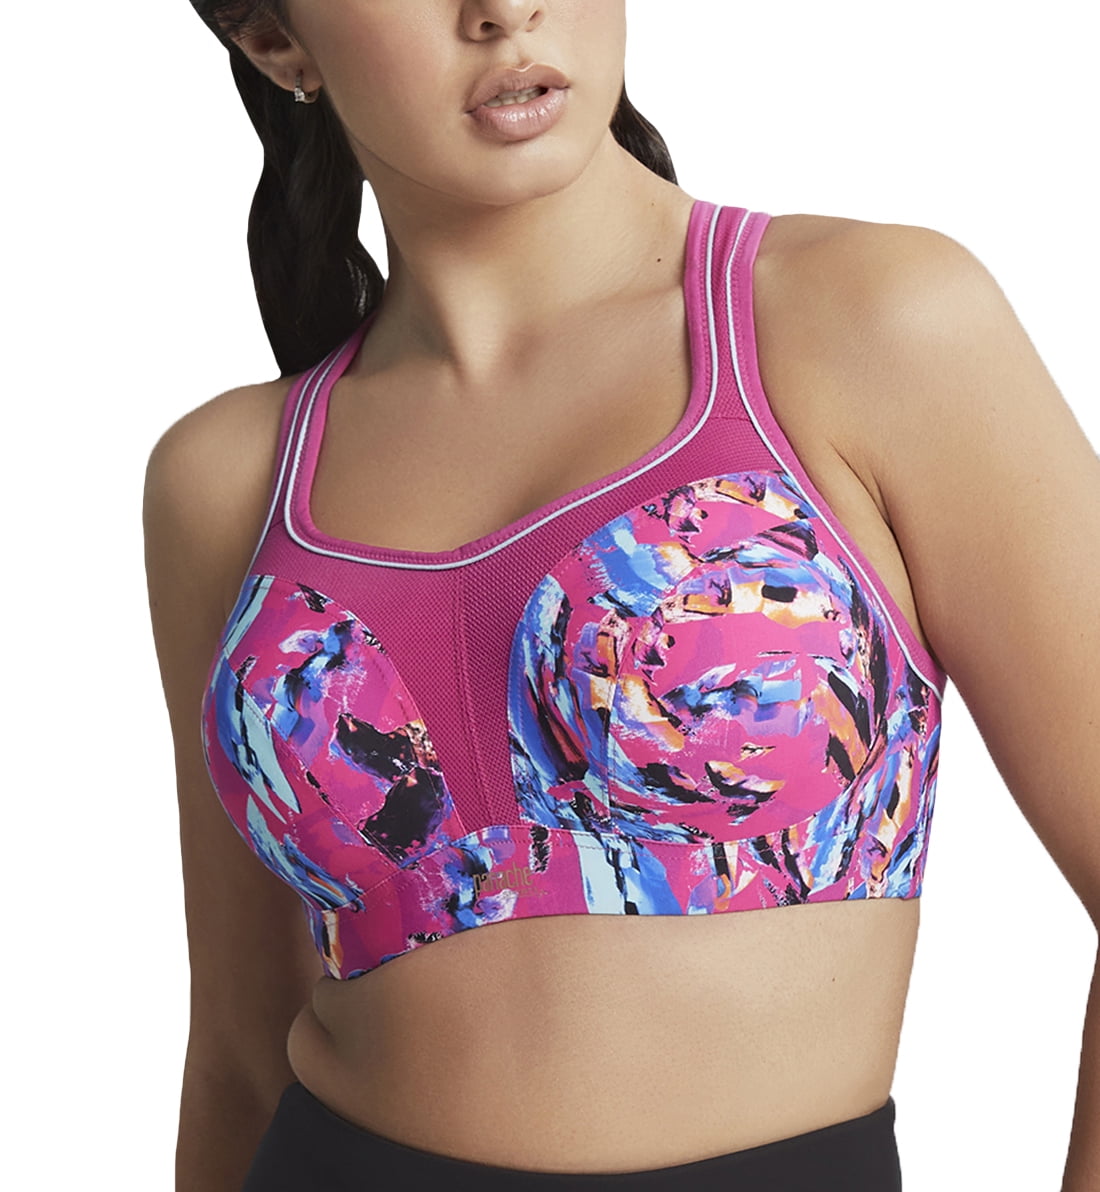 Panache Underwire Sports Bra (5021),38G,Abstract Orchid